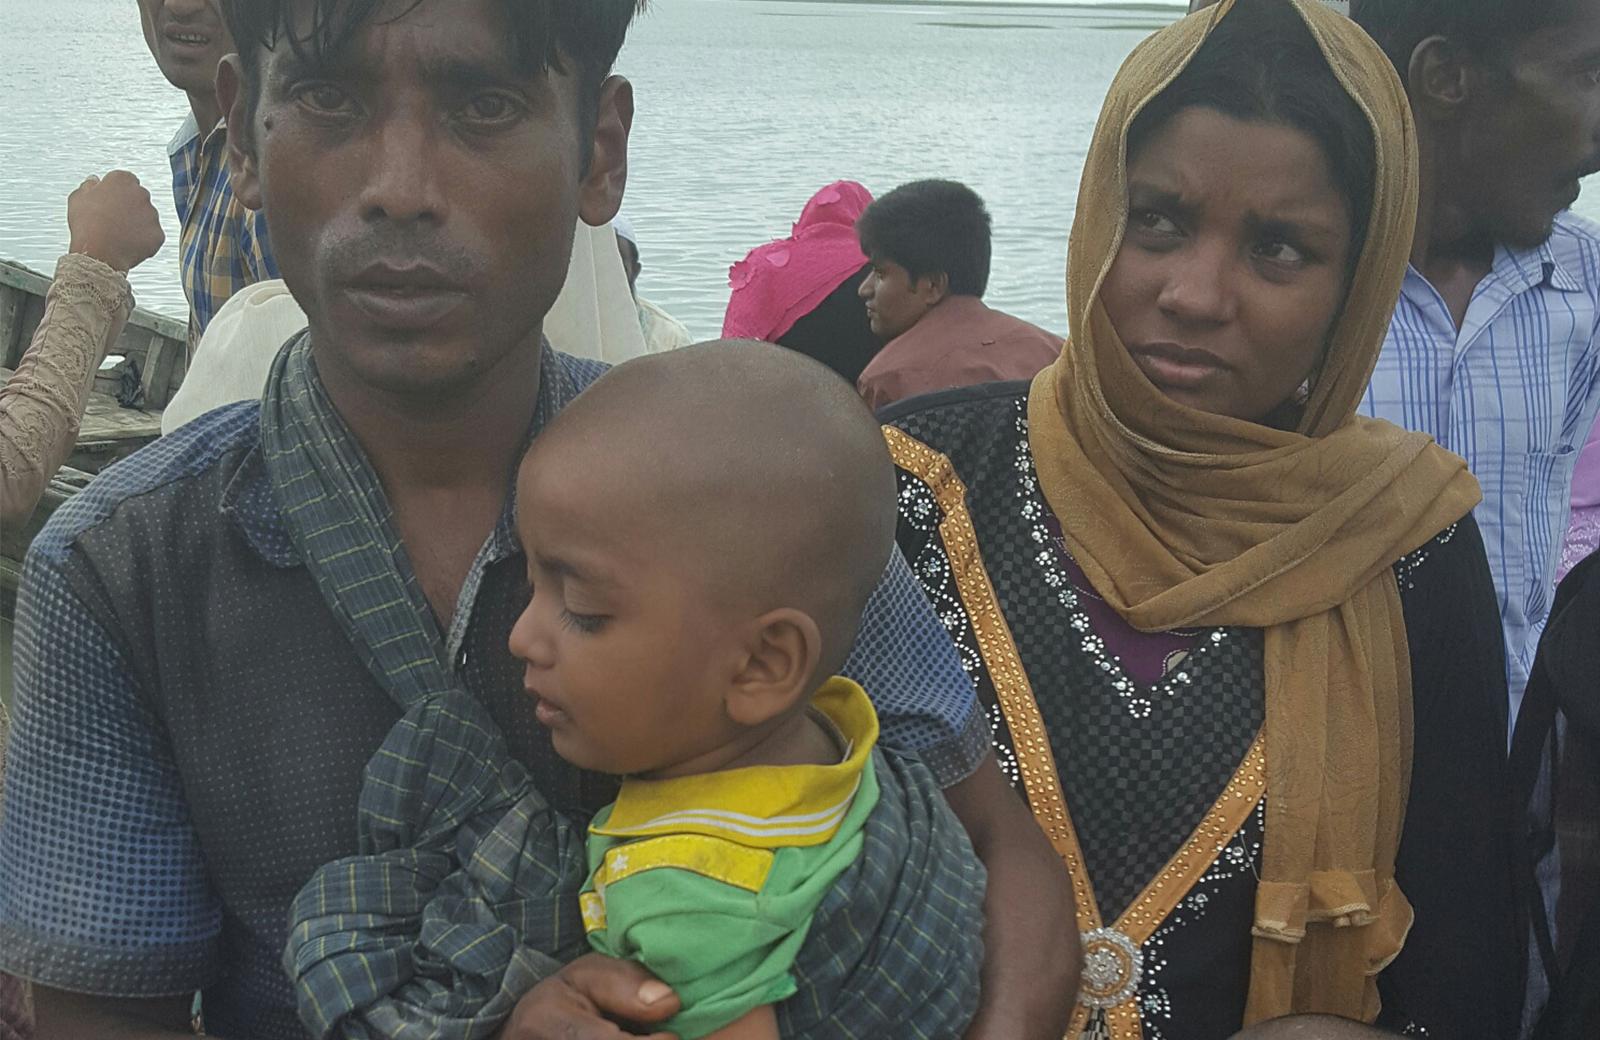 Muhammed Rafiq and his wife, Nuru, have fled with their two-year-old son Noyum, who is in need of medical attention